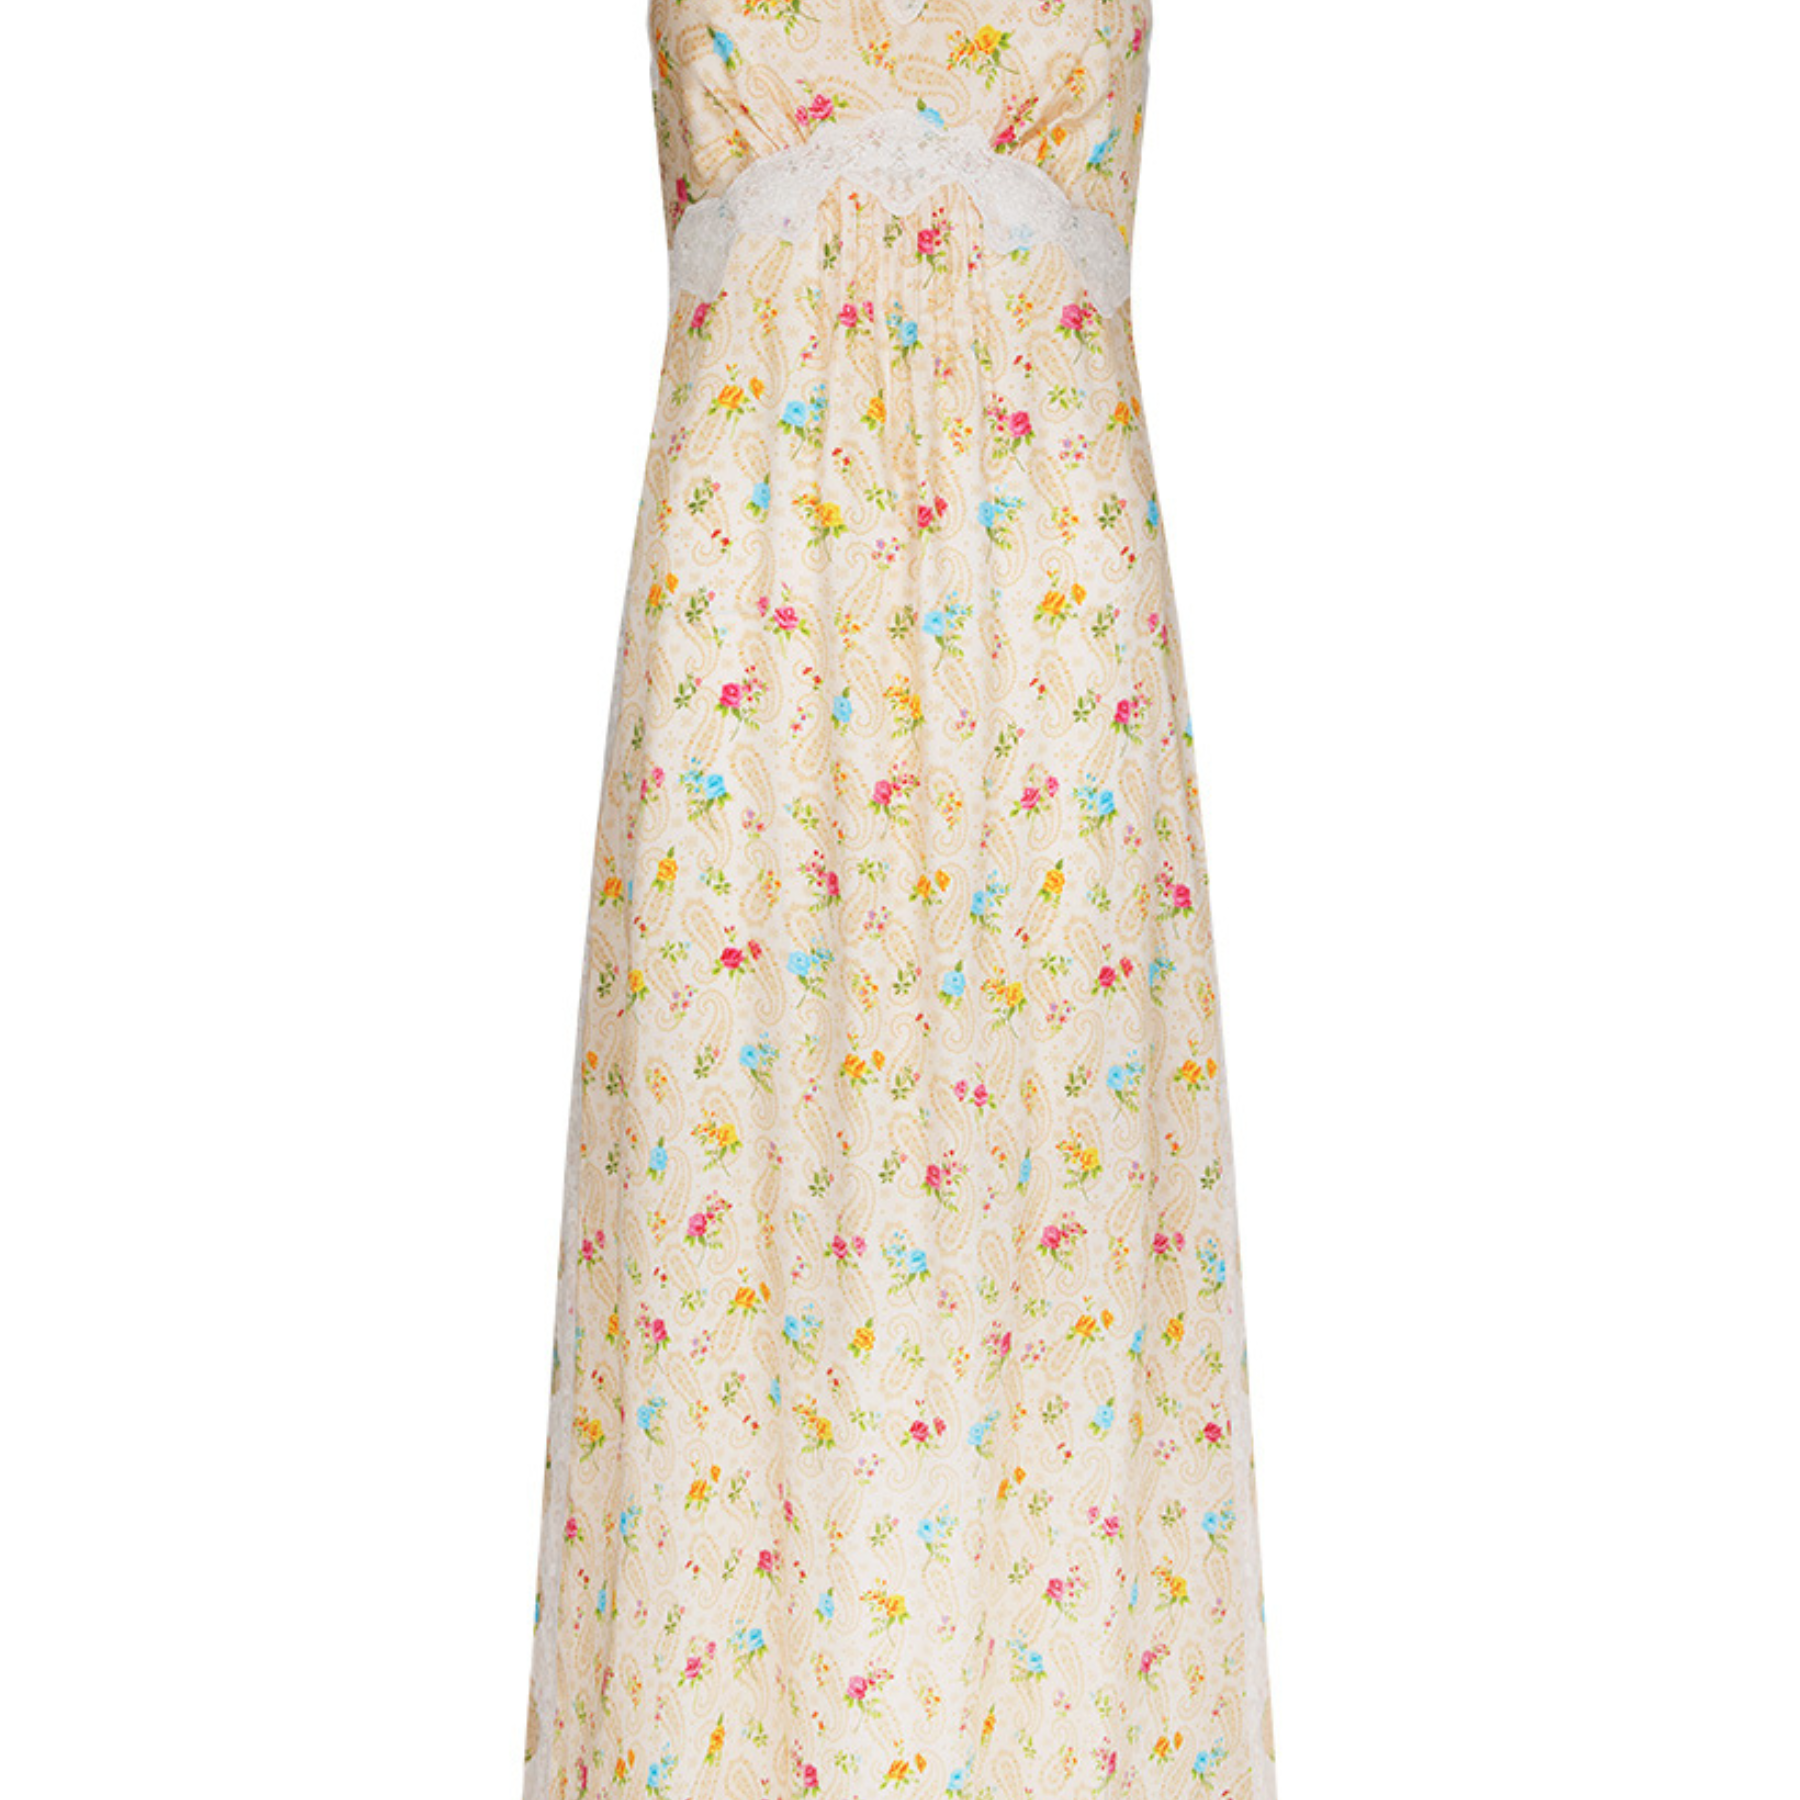 Spell Fleur slip dress in ditzy floral with lace trims